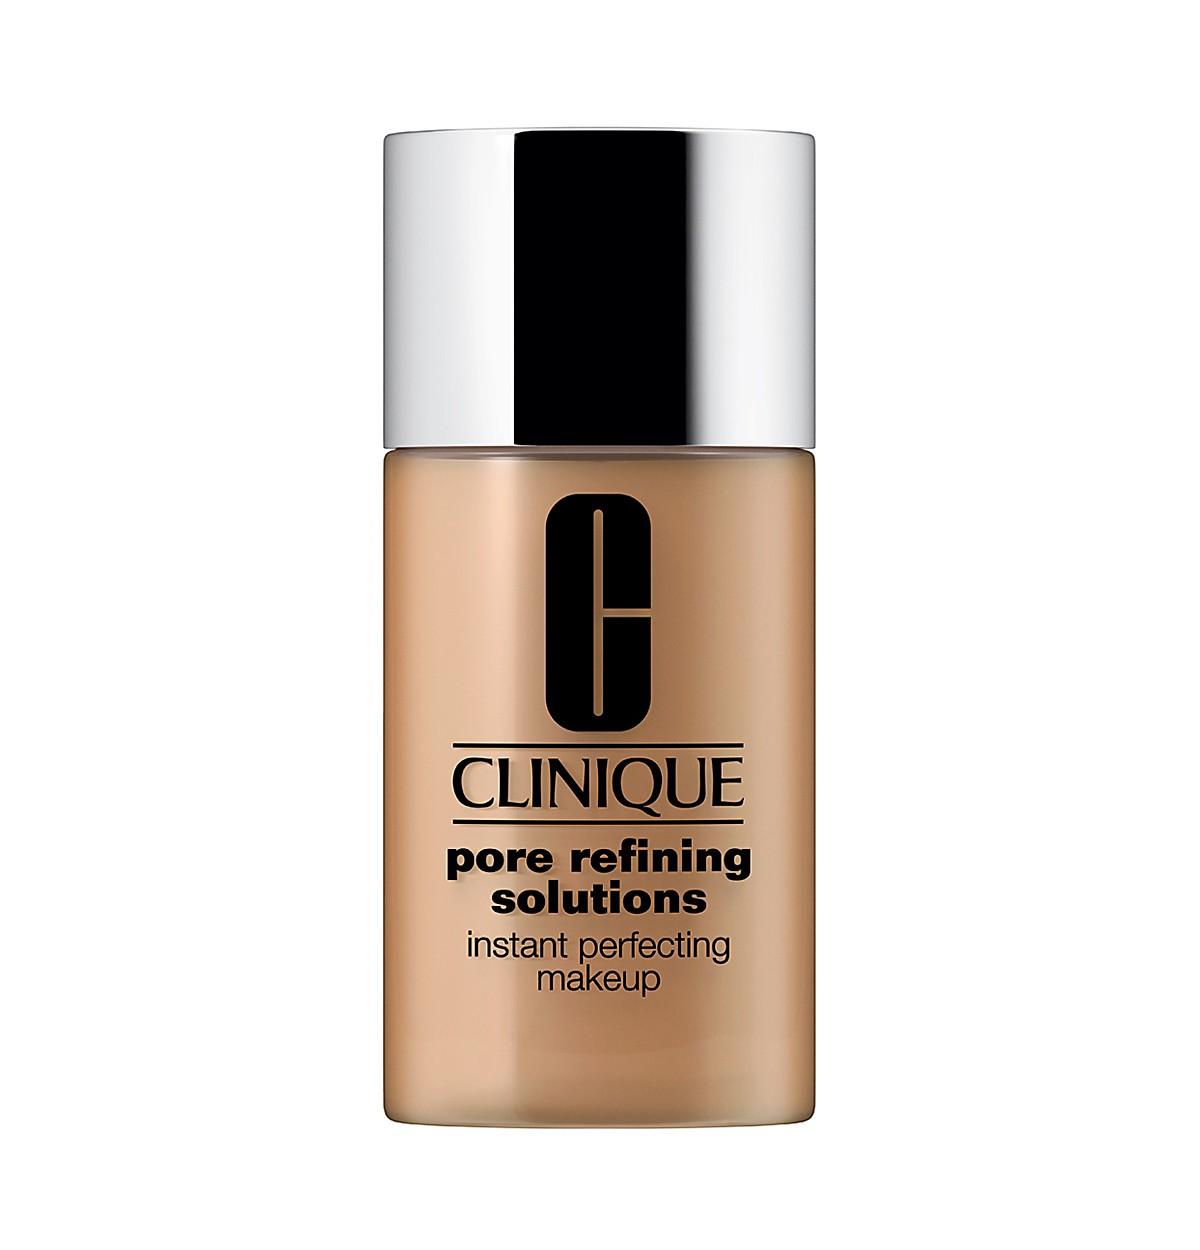 Foto Mujer Maquillaje Clinique Pore Refining Solutions Instant Perfecting foto 762759